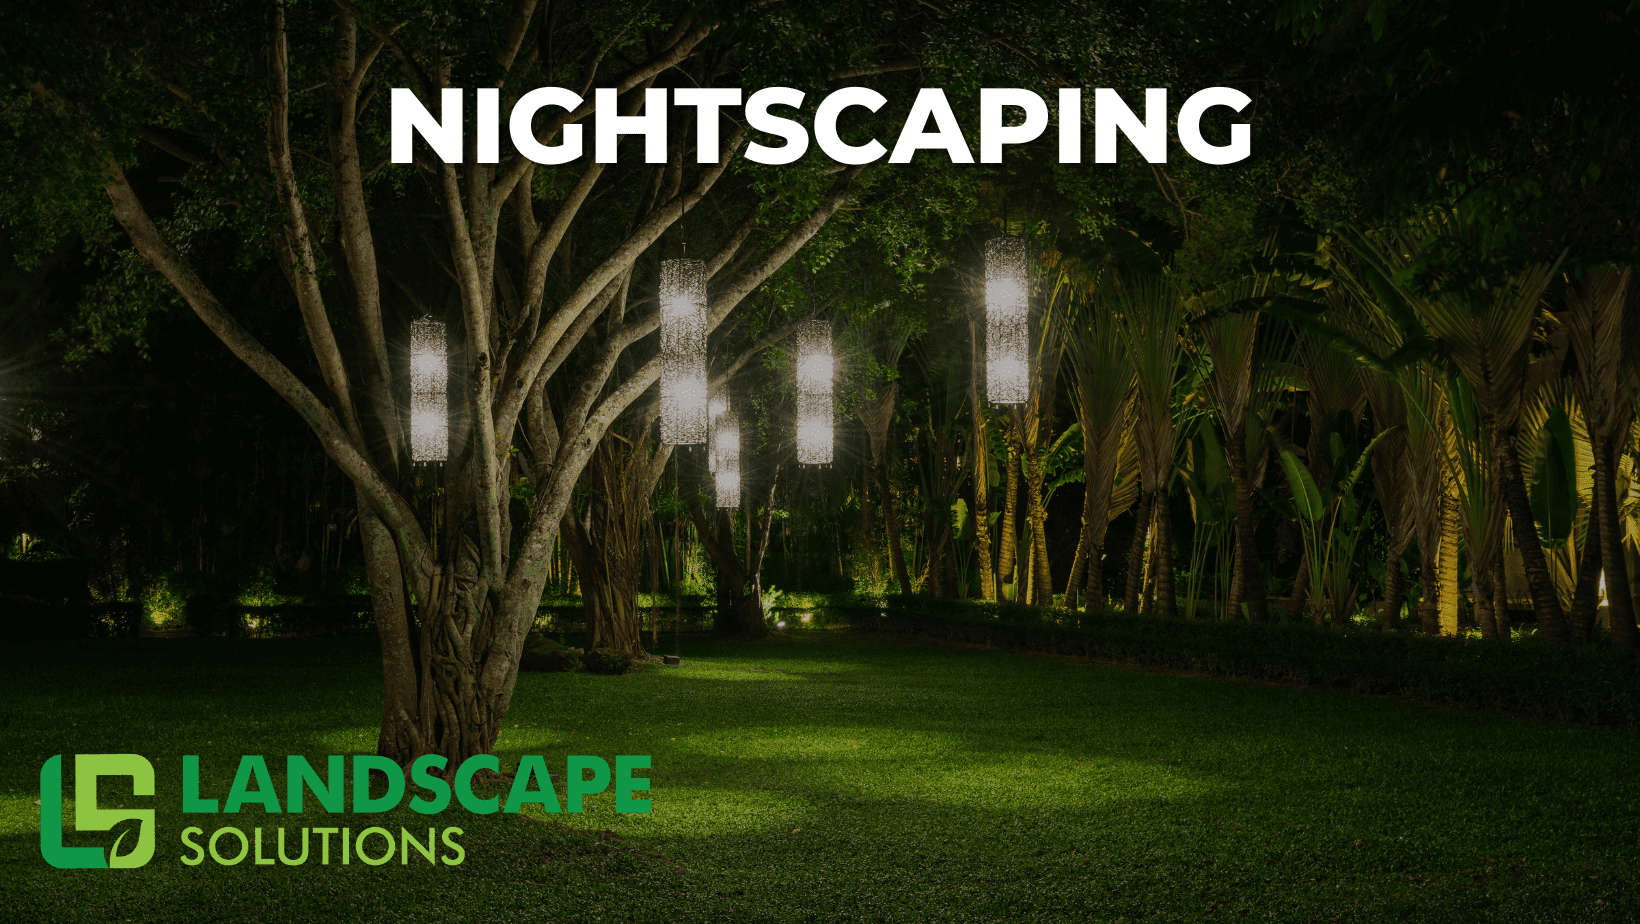 Nightscaping